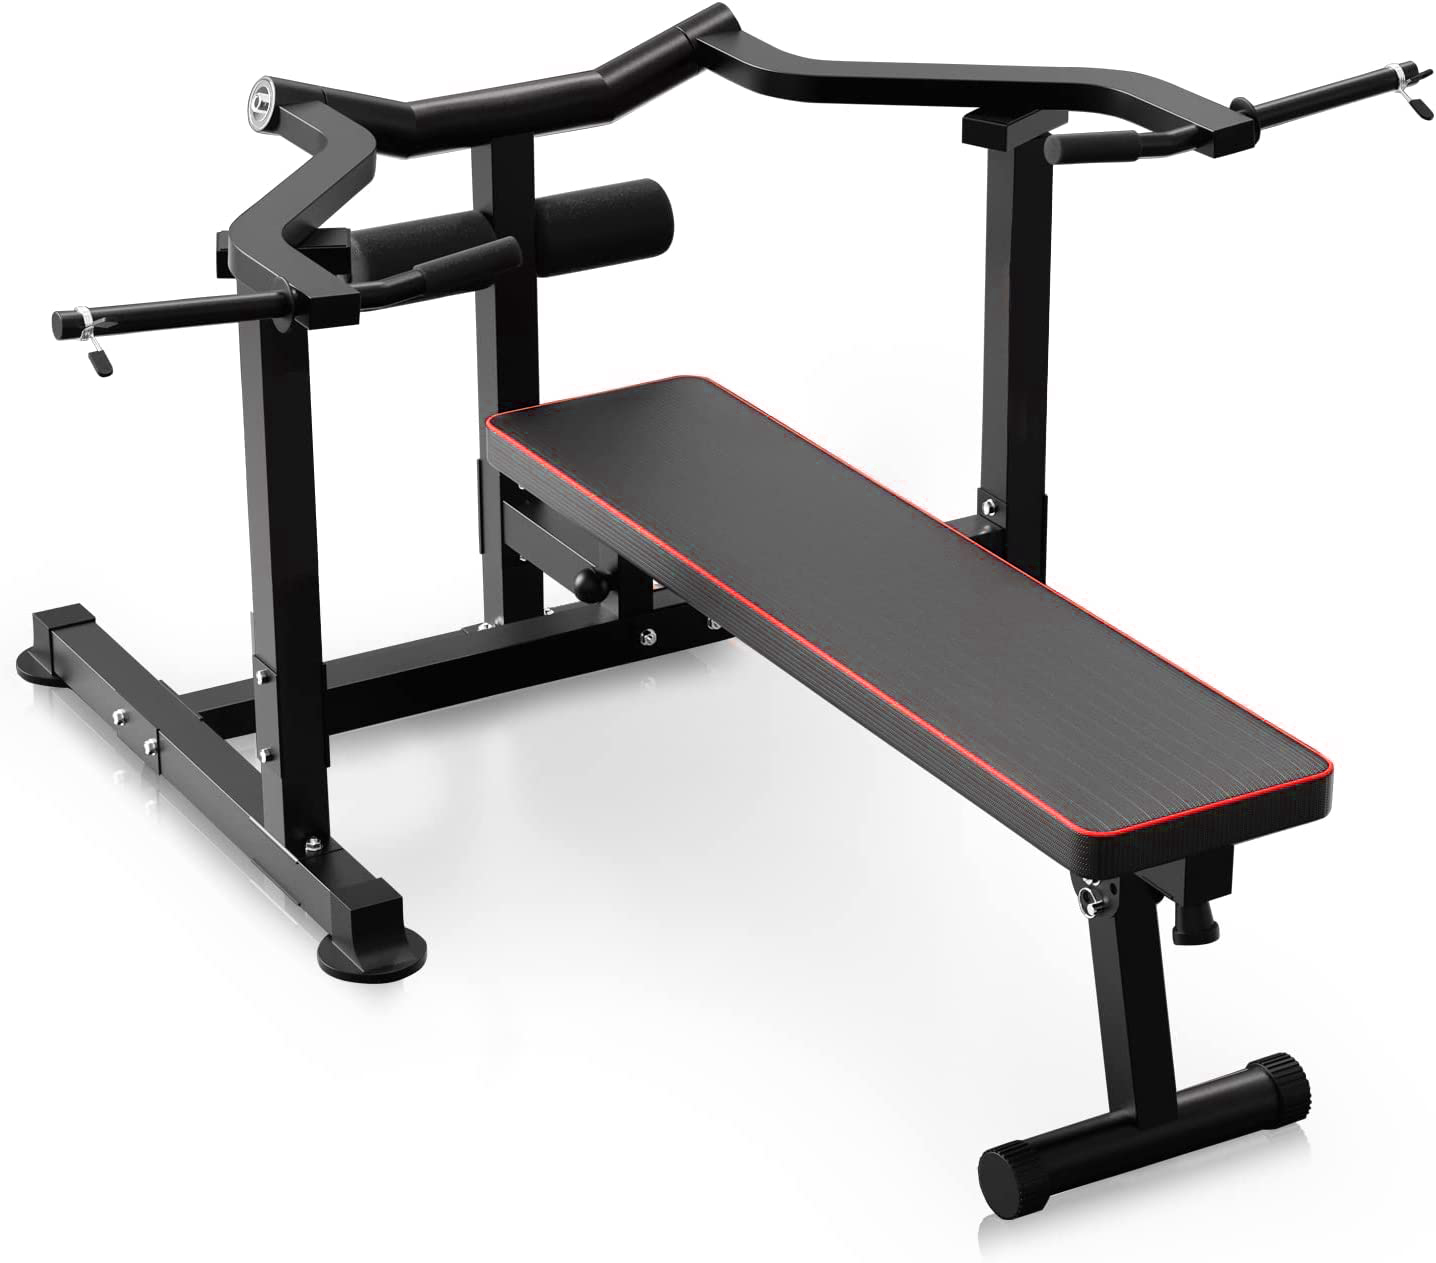 Wesfital Bench Press Set, Chest Press Machine with Independent